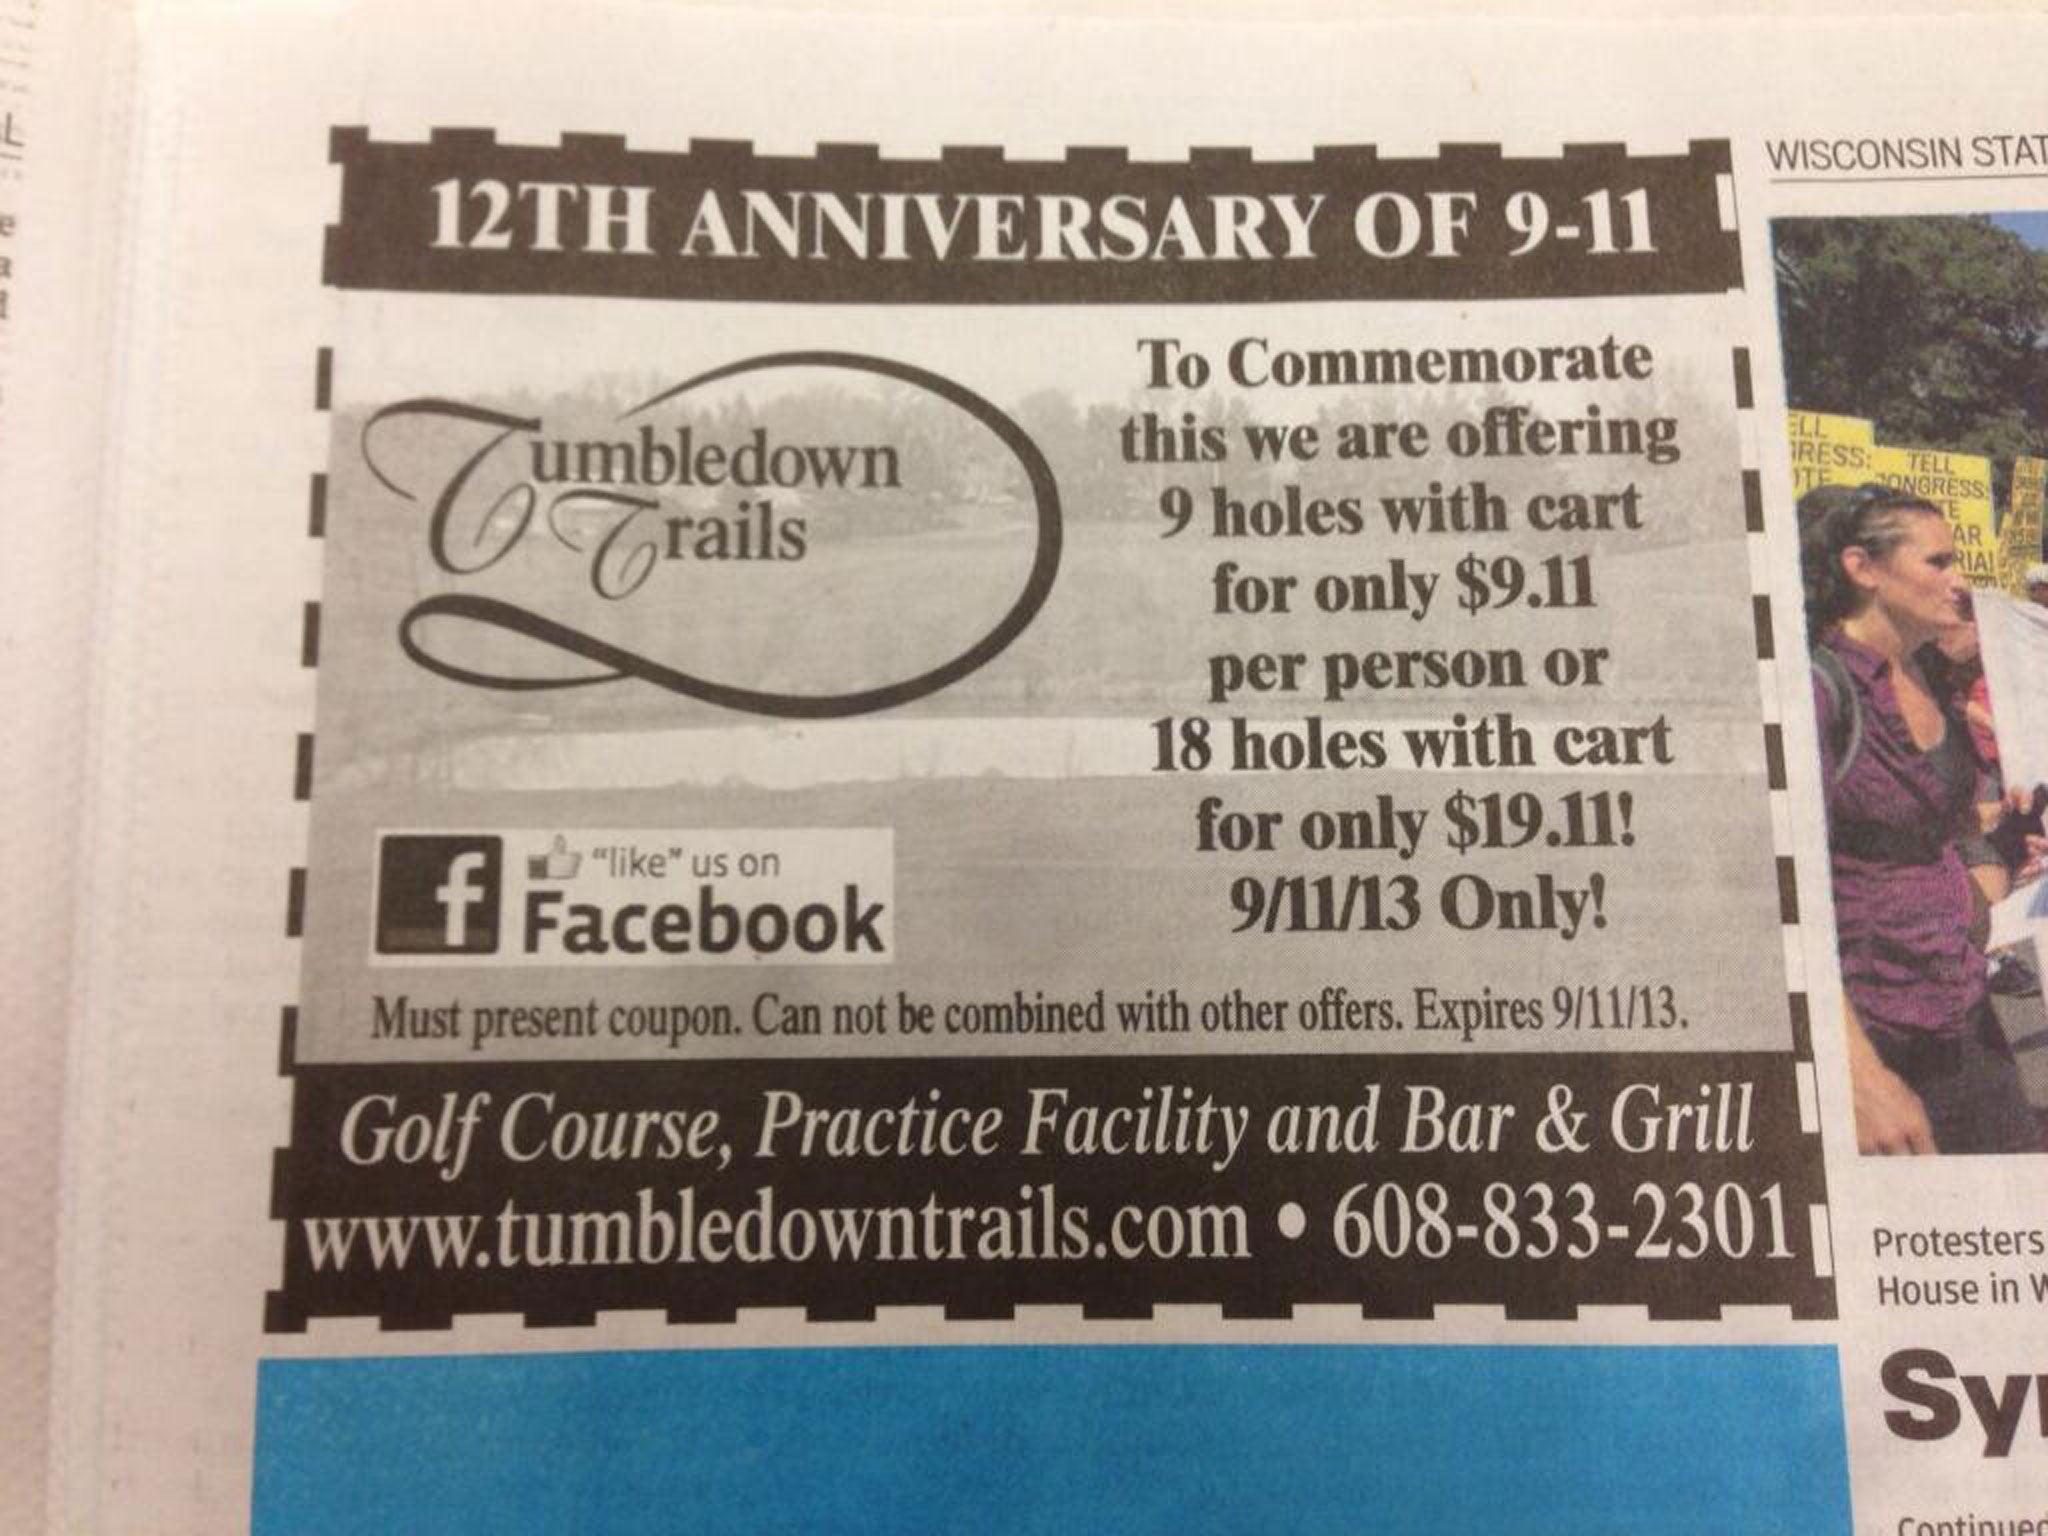 A golf club in Wisconsin received threats of violence after this newspaper advert for a 9/11 commemoration promotion went viral on Twitter